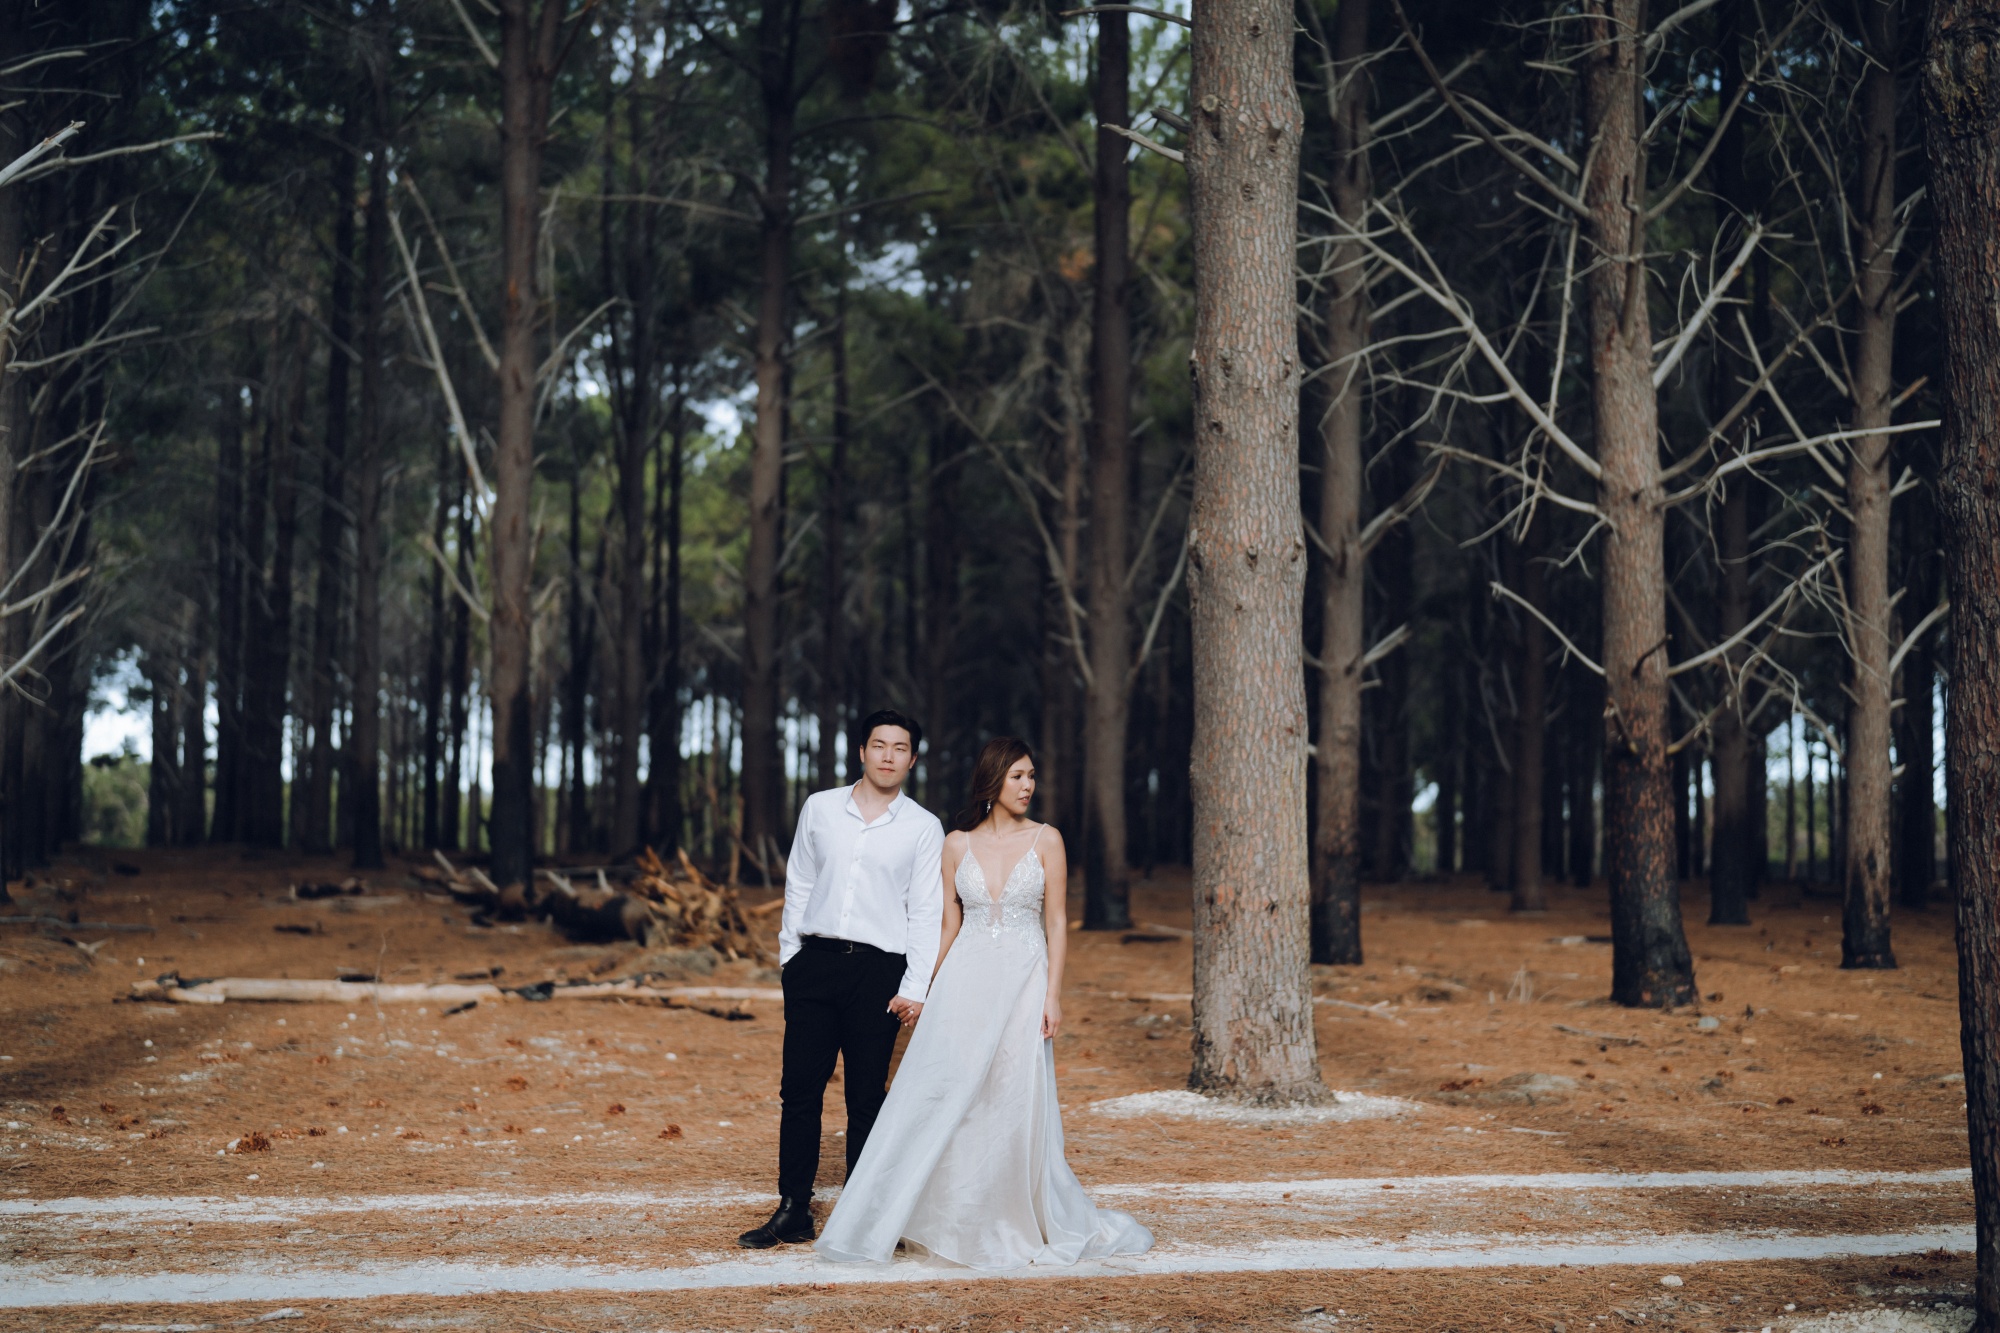 Capturing Forever in Perth: Jasmine & Kamui's Pre-Wedding Story by Jimmy on OneThreeOneFour 8